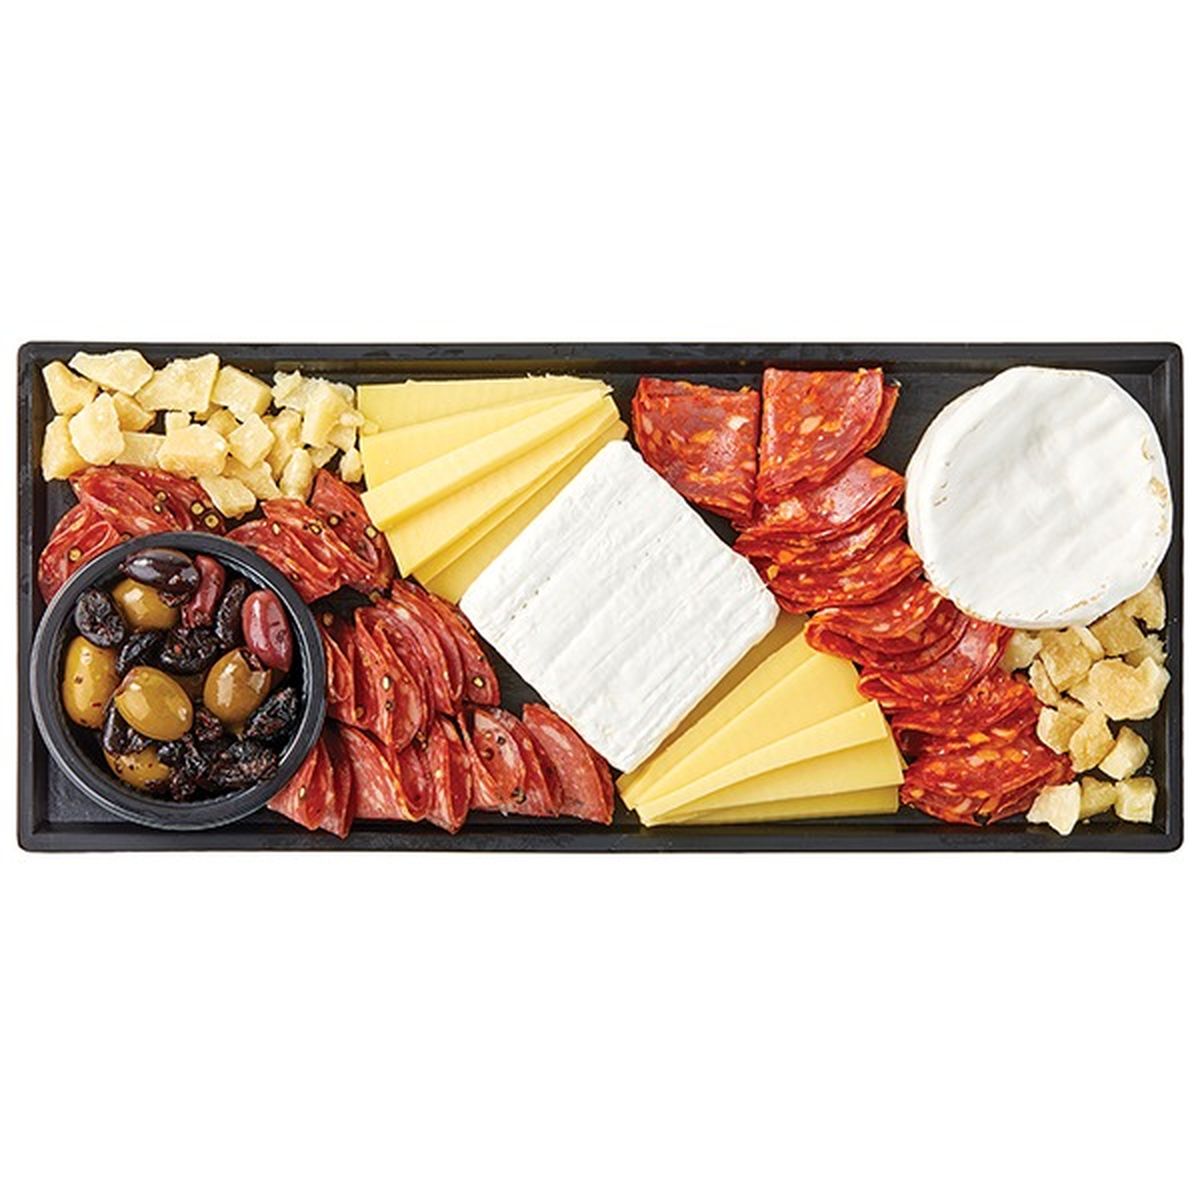 Calories in Wegmans Cheese & Charcuterie Tray, Danny's Favorites, Full Size